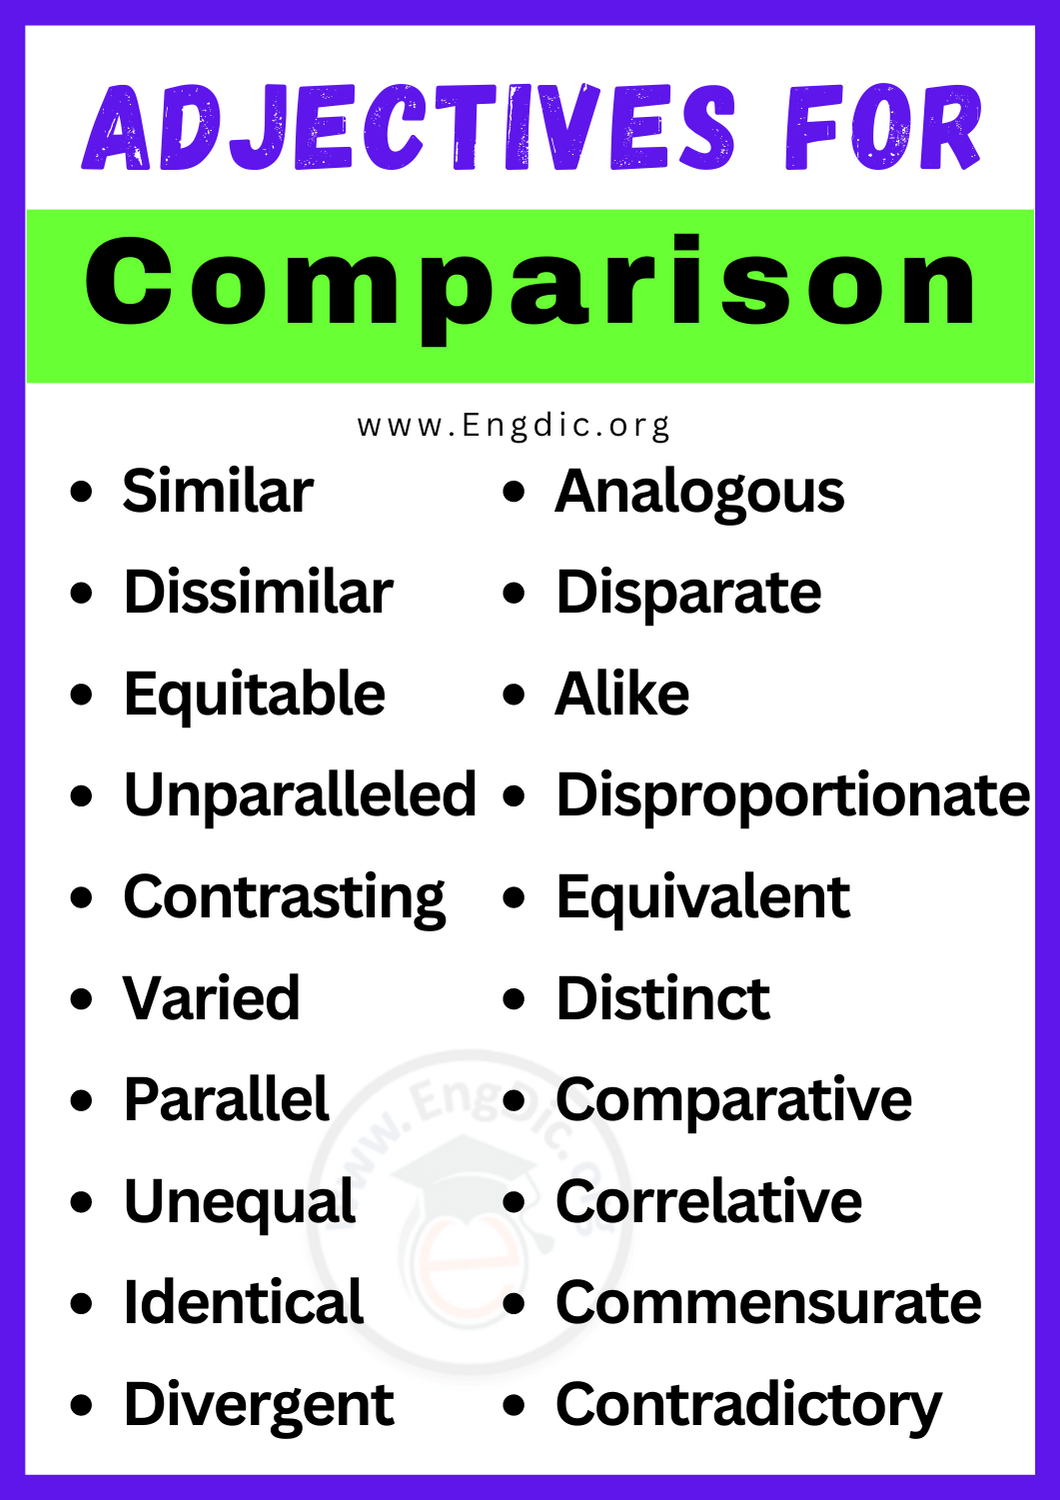 Adjectives for Comparison